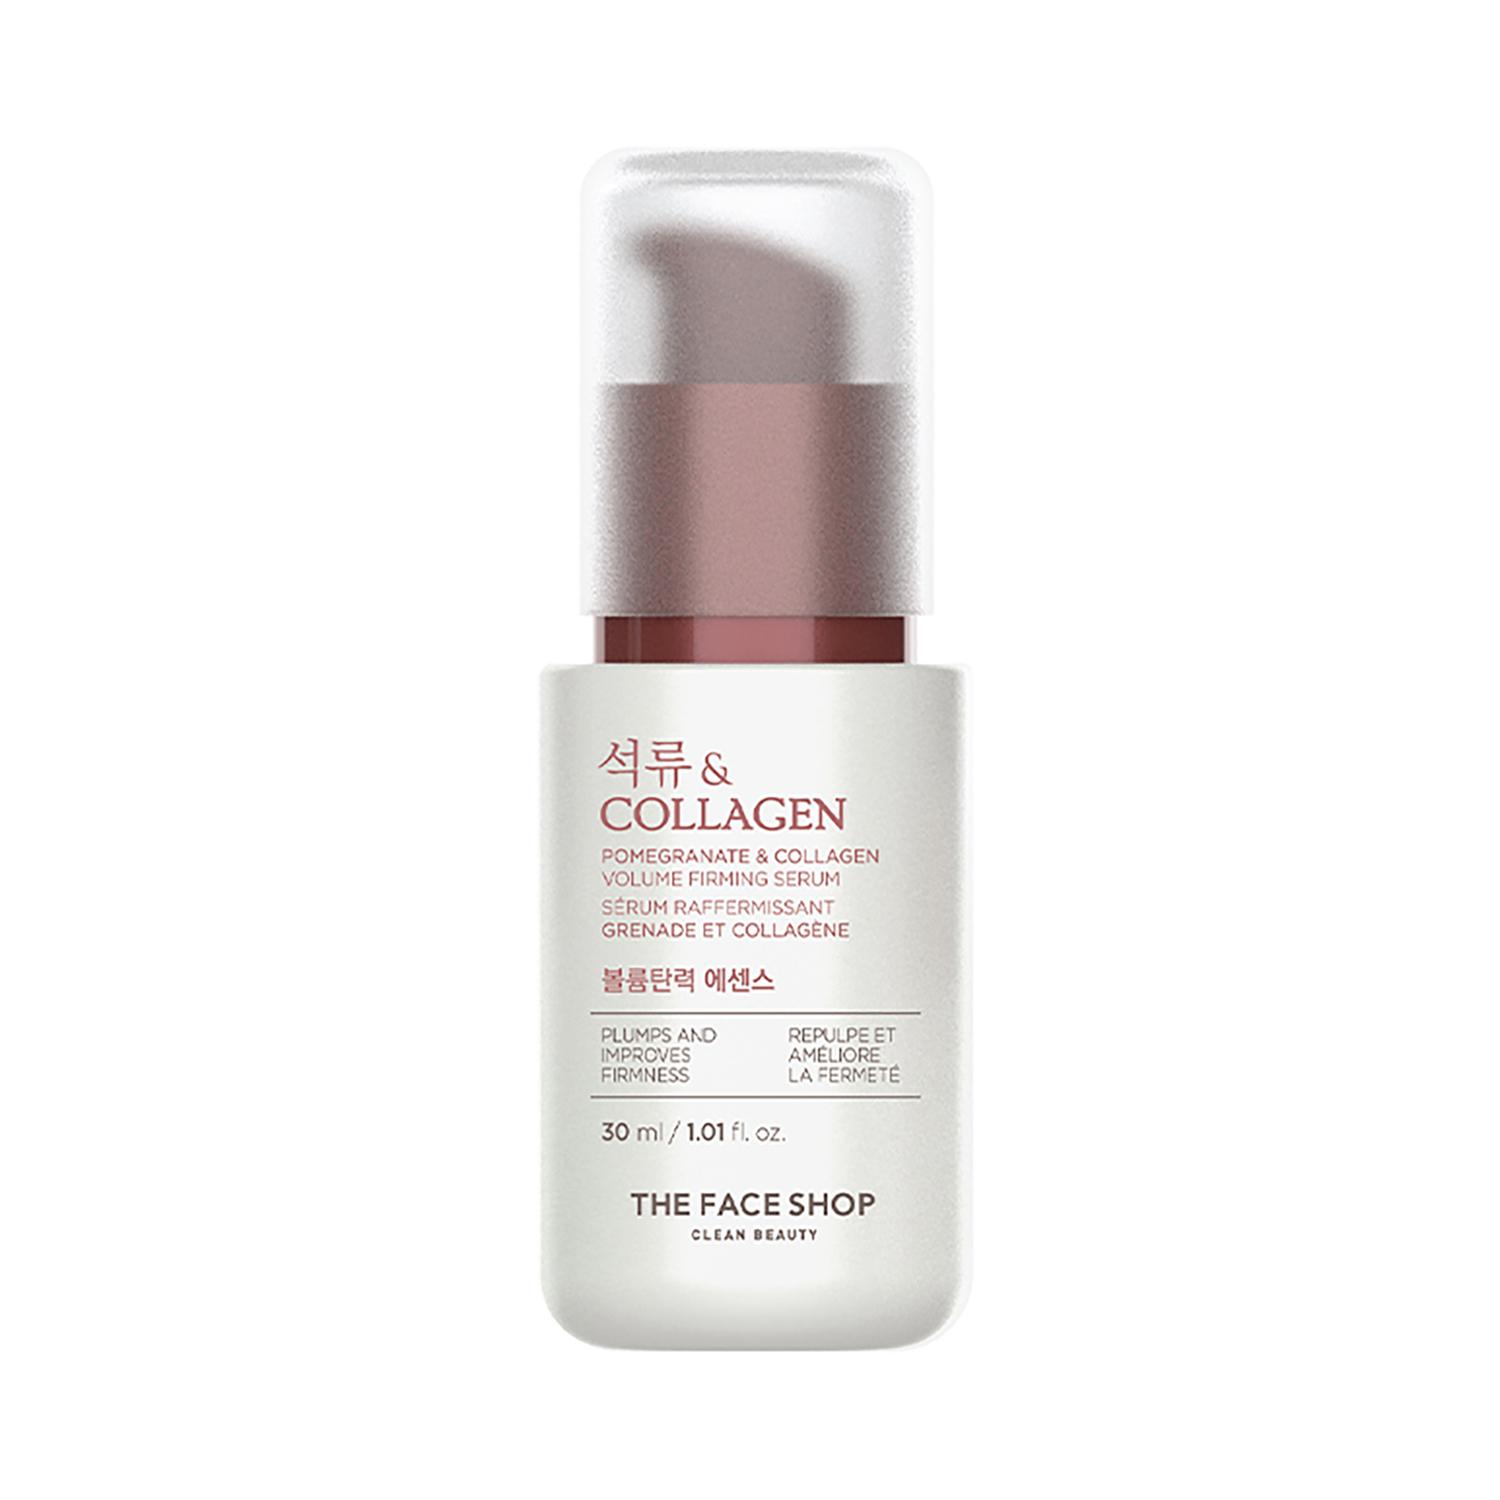 The Face Shop | The Face Shop Pomegranate and Collagen Volume Lifting Serum (30 ml)